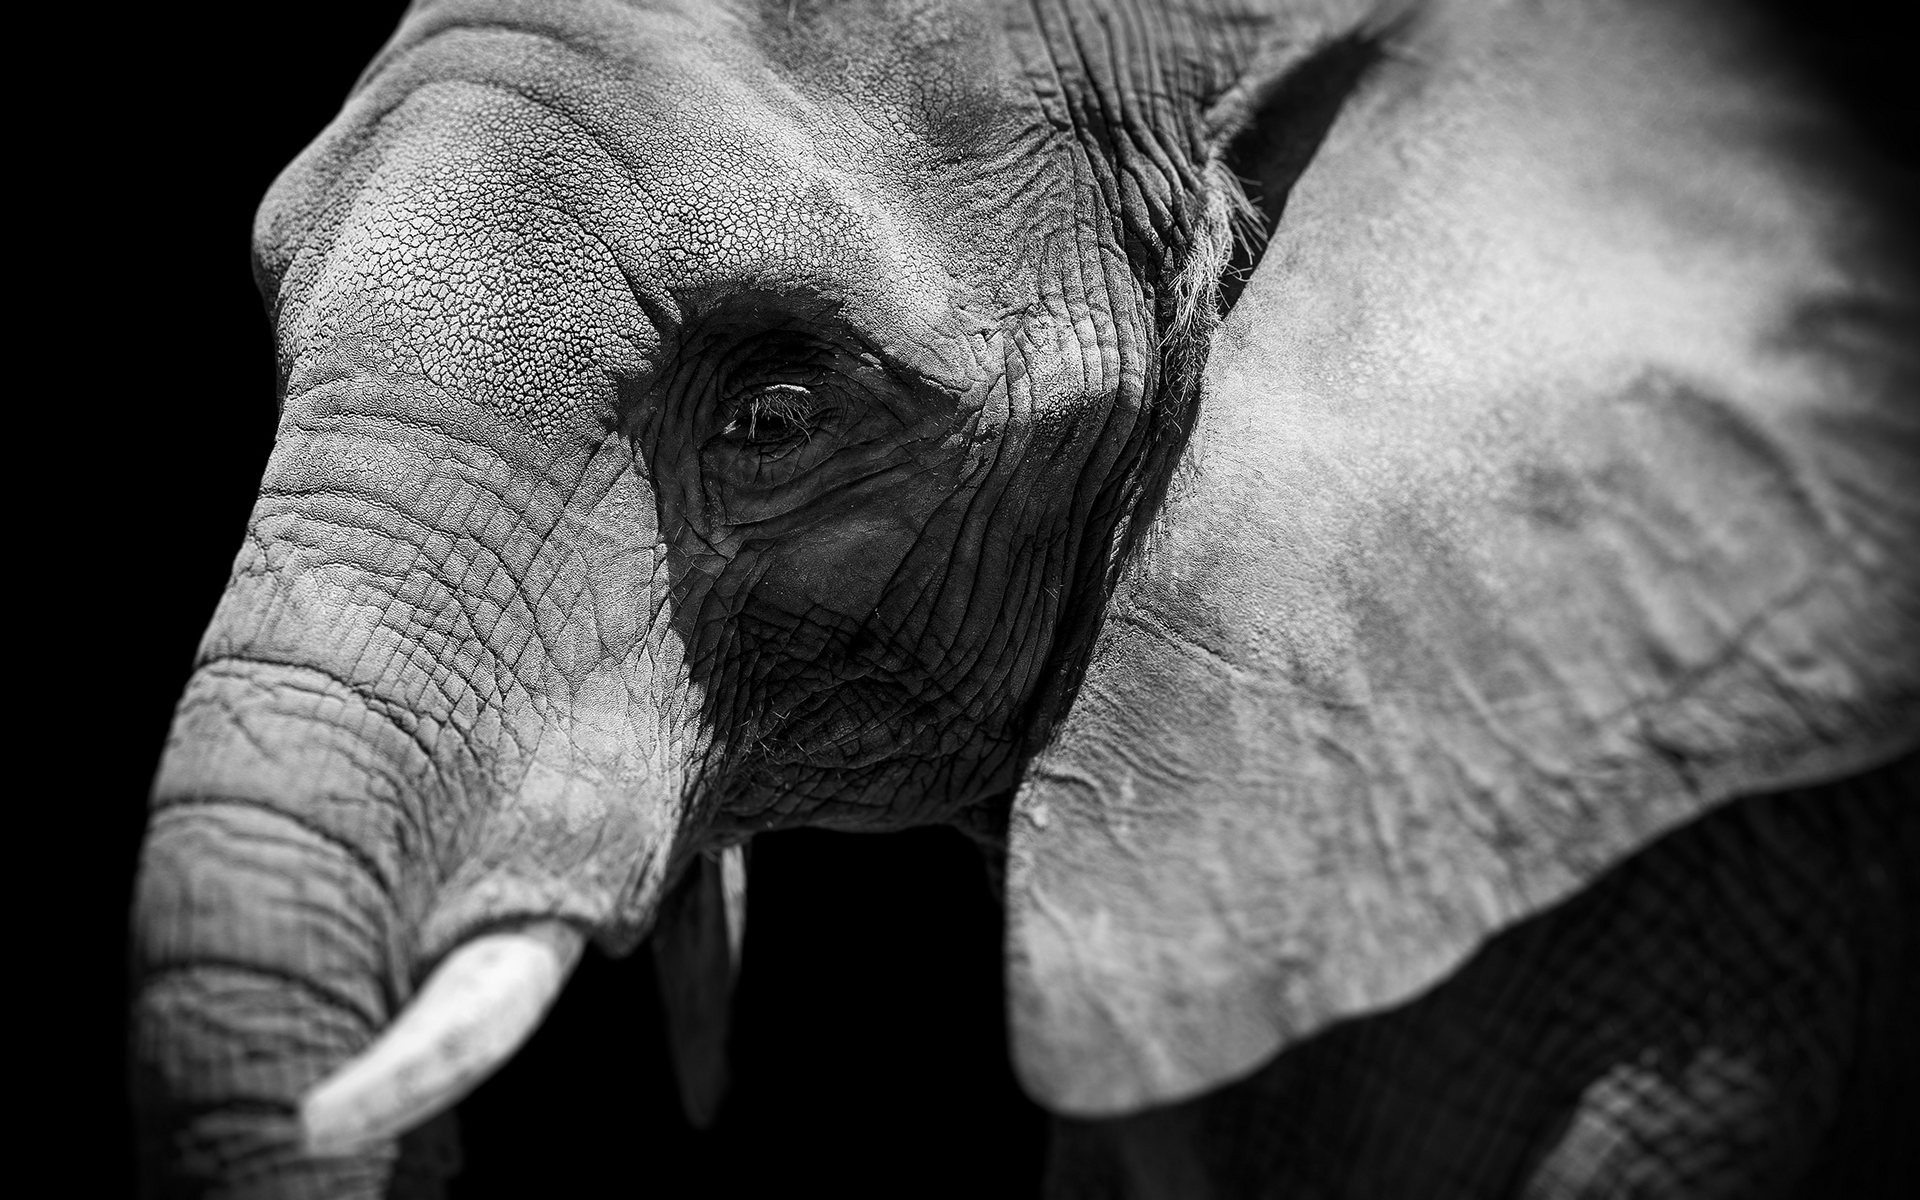 Elephant Full HD Wallpaper and Background Image | 1920x1200 | ID:417316